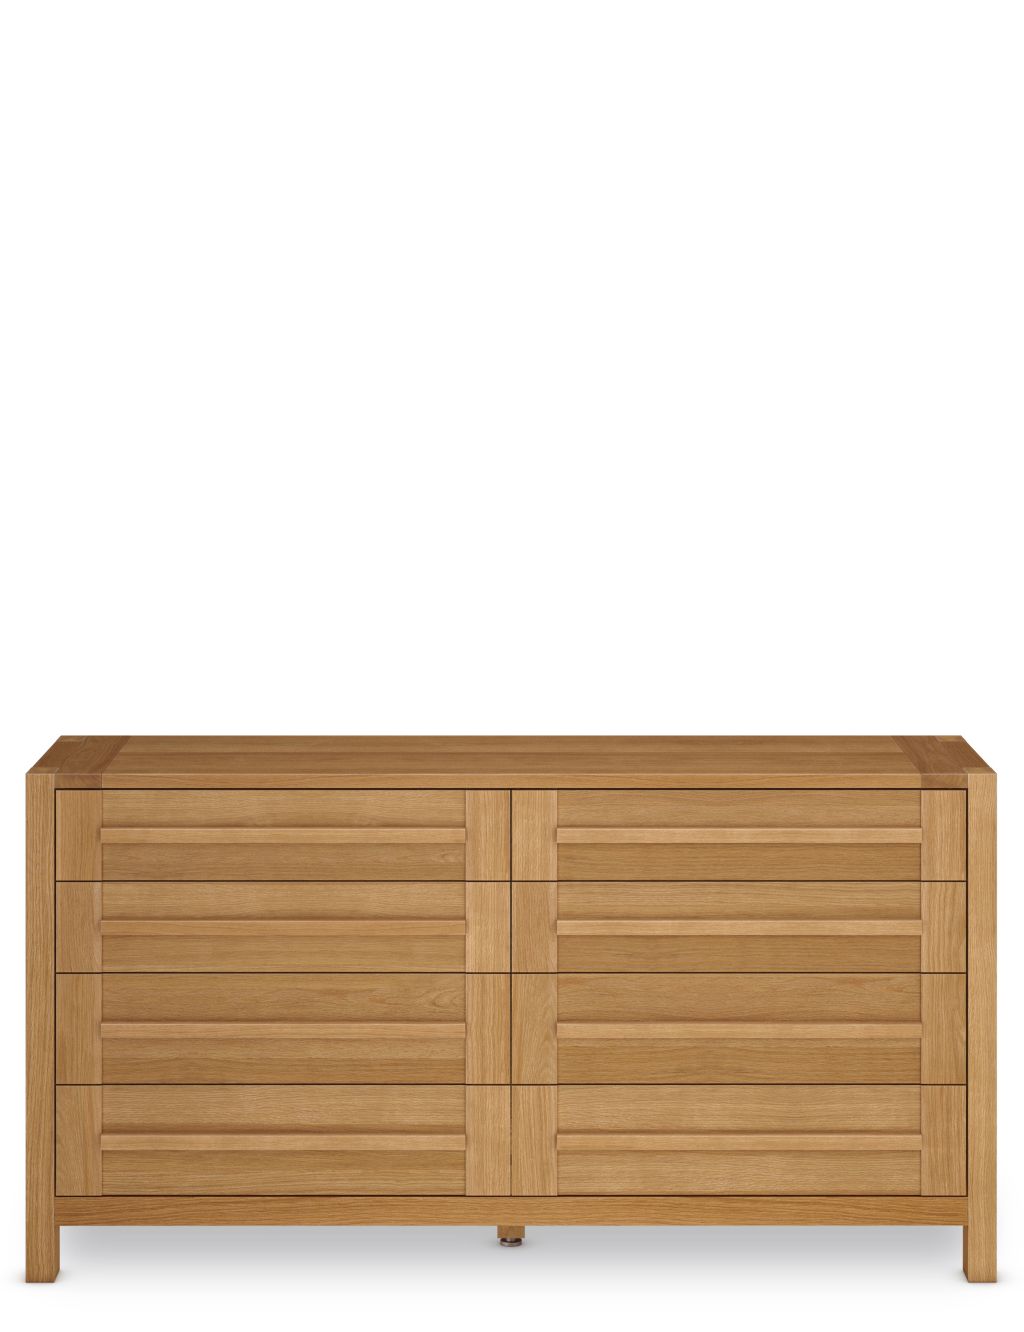 Sonoma™ Wide 8 Drawer Chest image 2